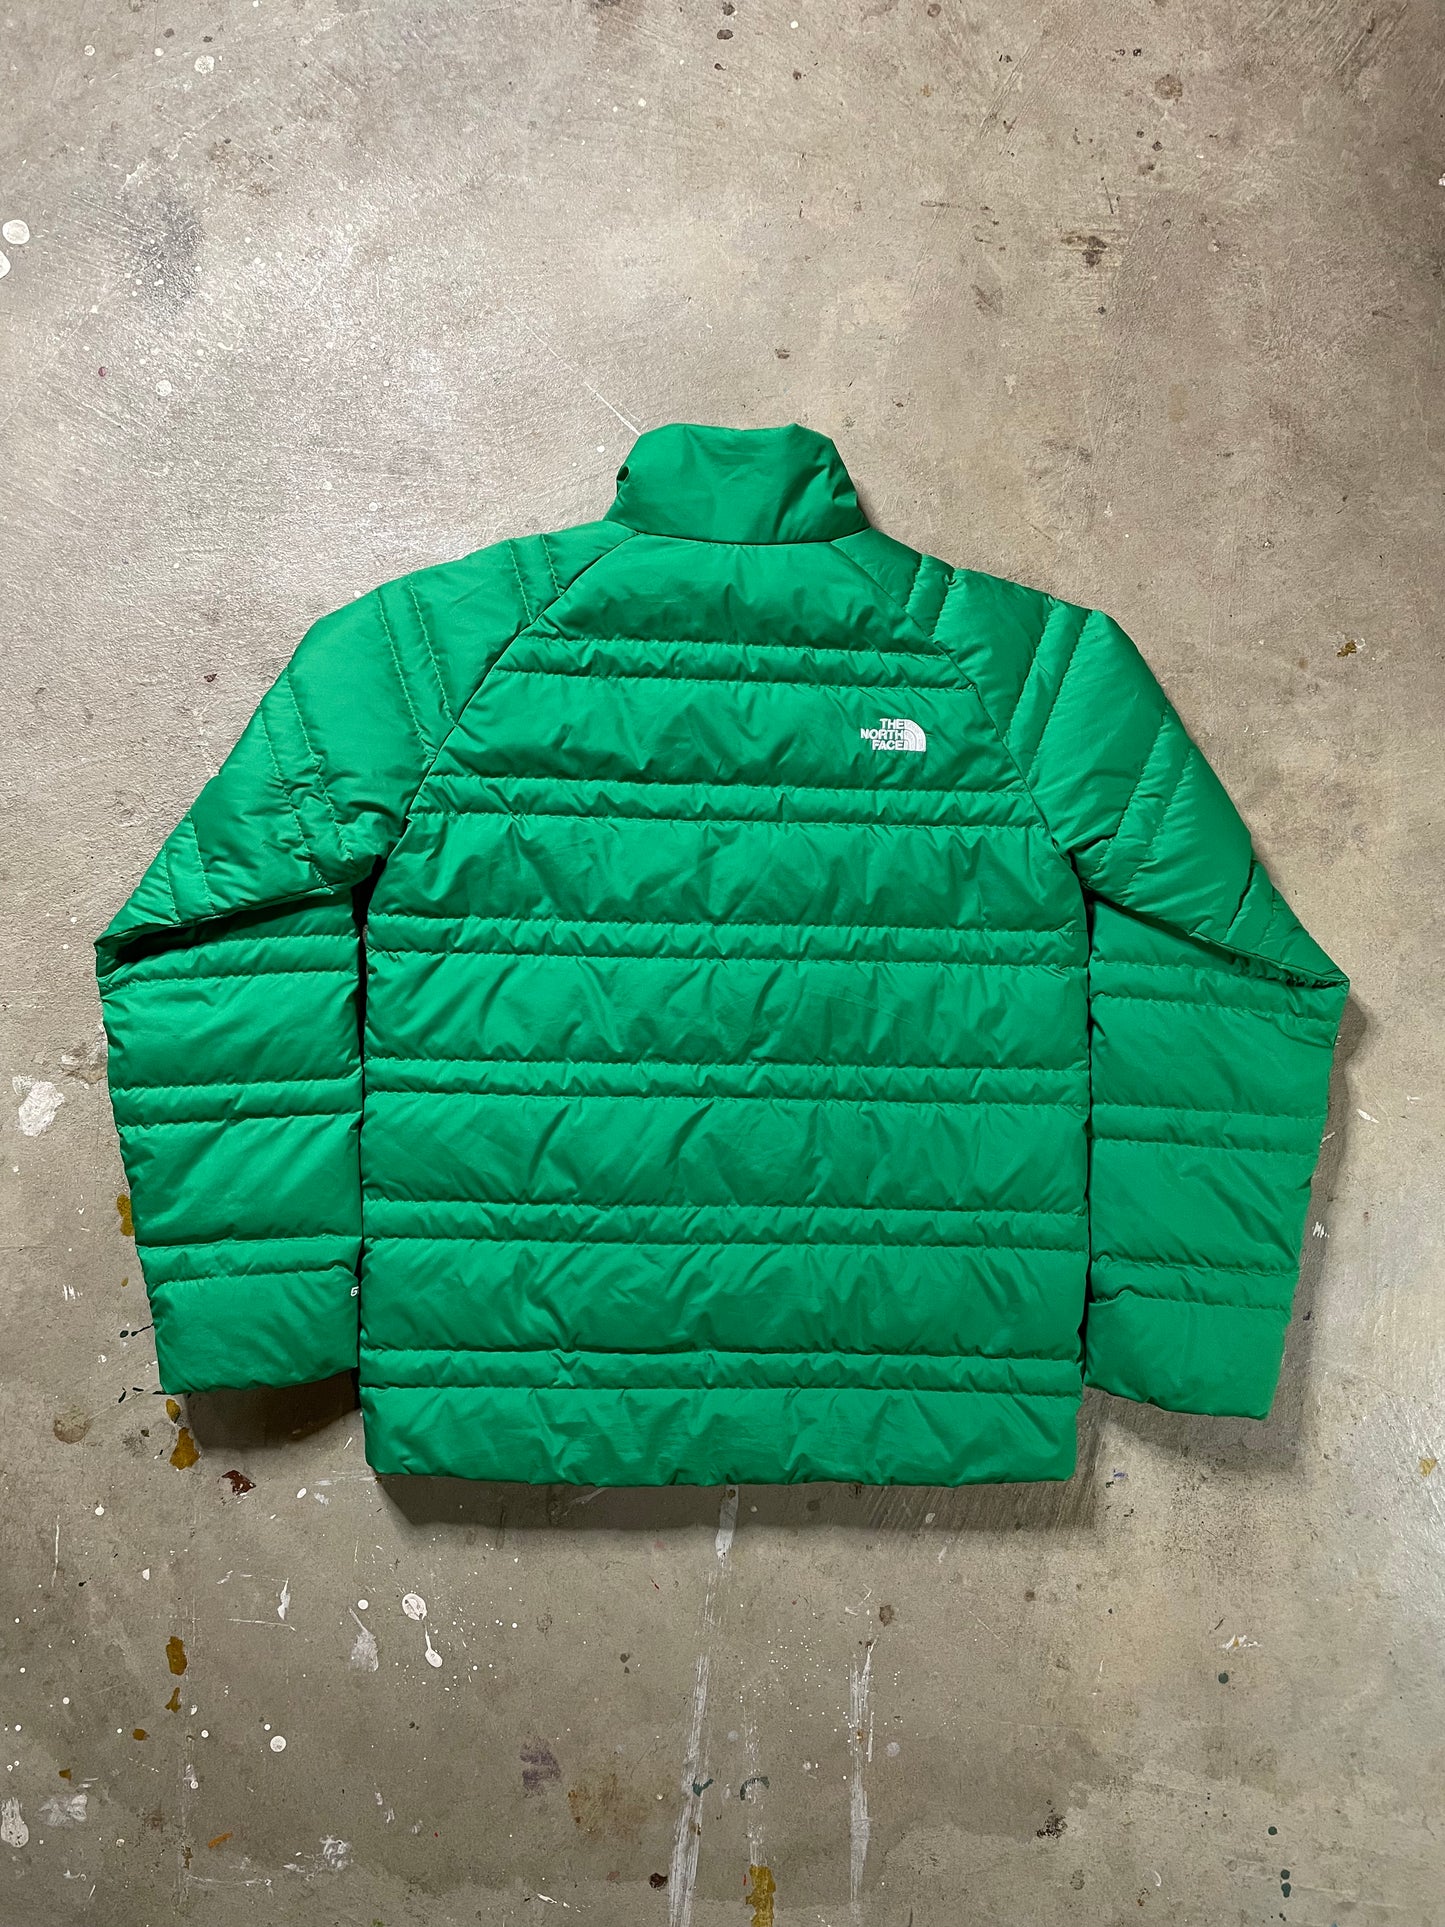 The North Face 550 Jacket